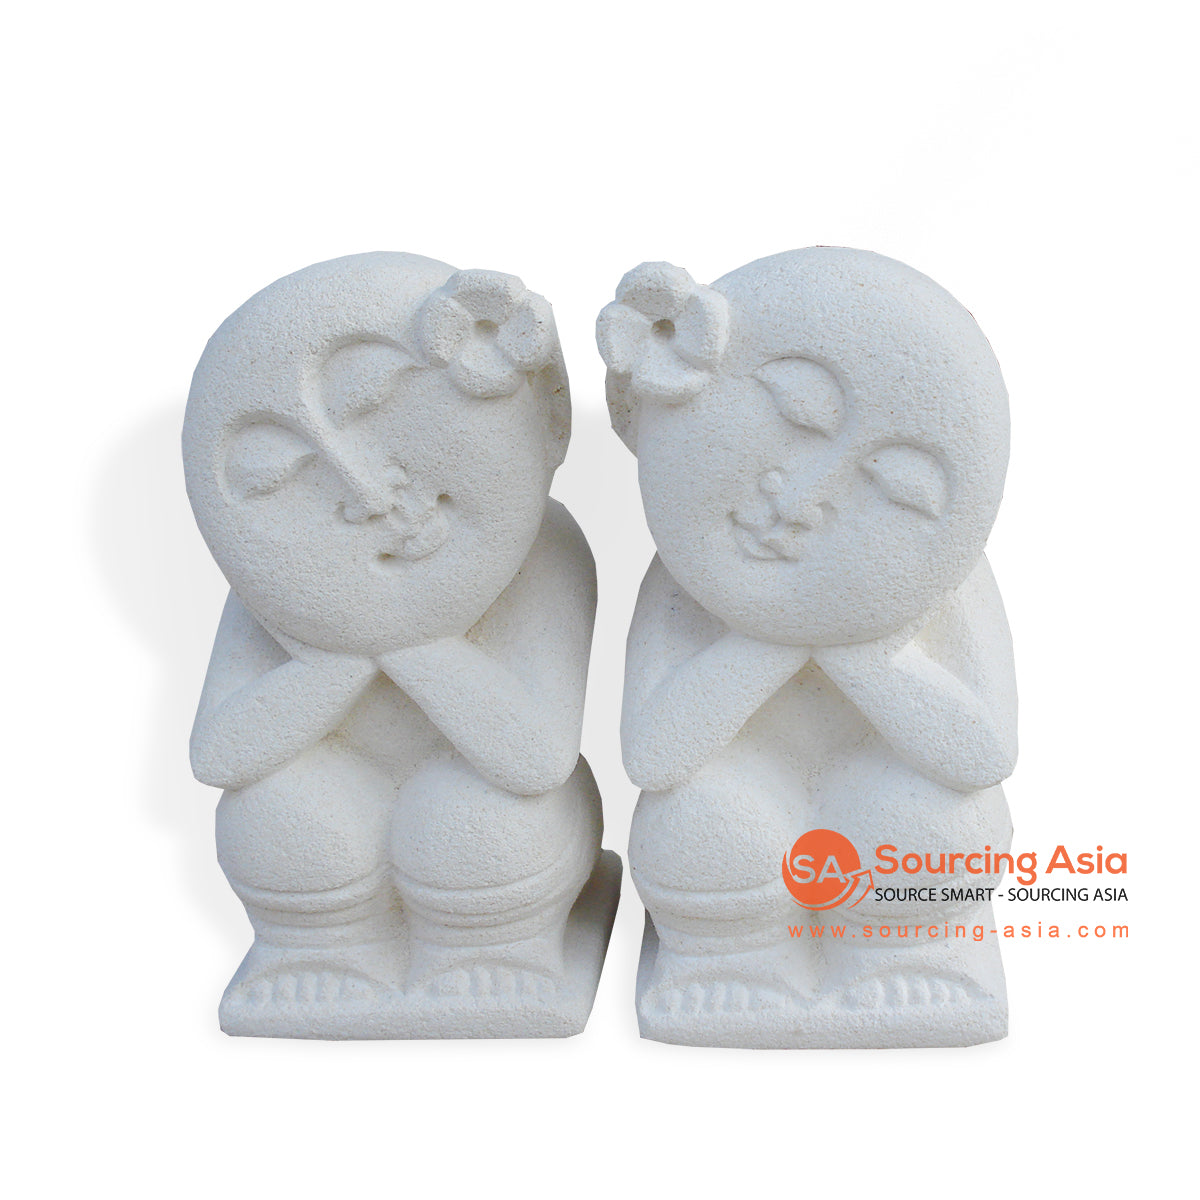 MHB049 SET OF TWO STONE DREAMING BALD FIGURE STATUES